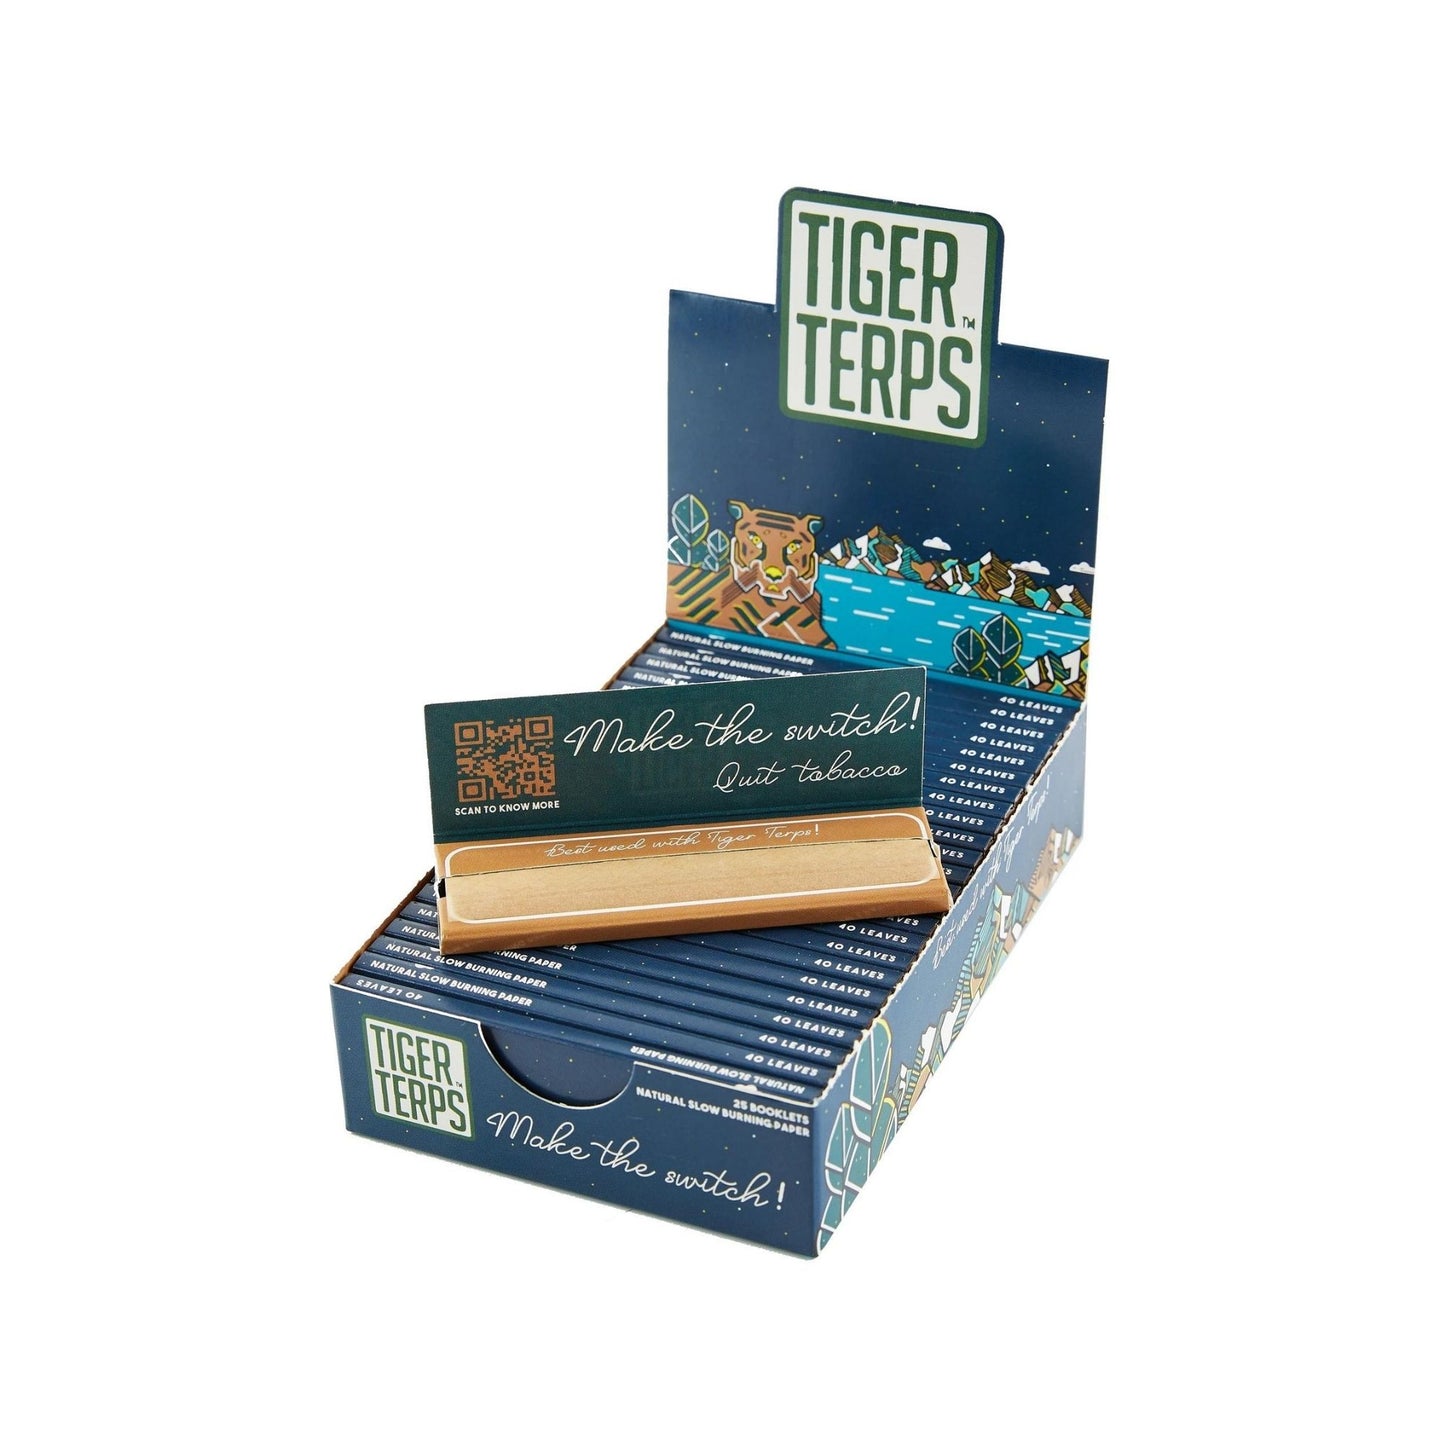 TIGER TERPS Natural Rolling Paper - 1 ¼ Size